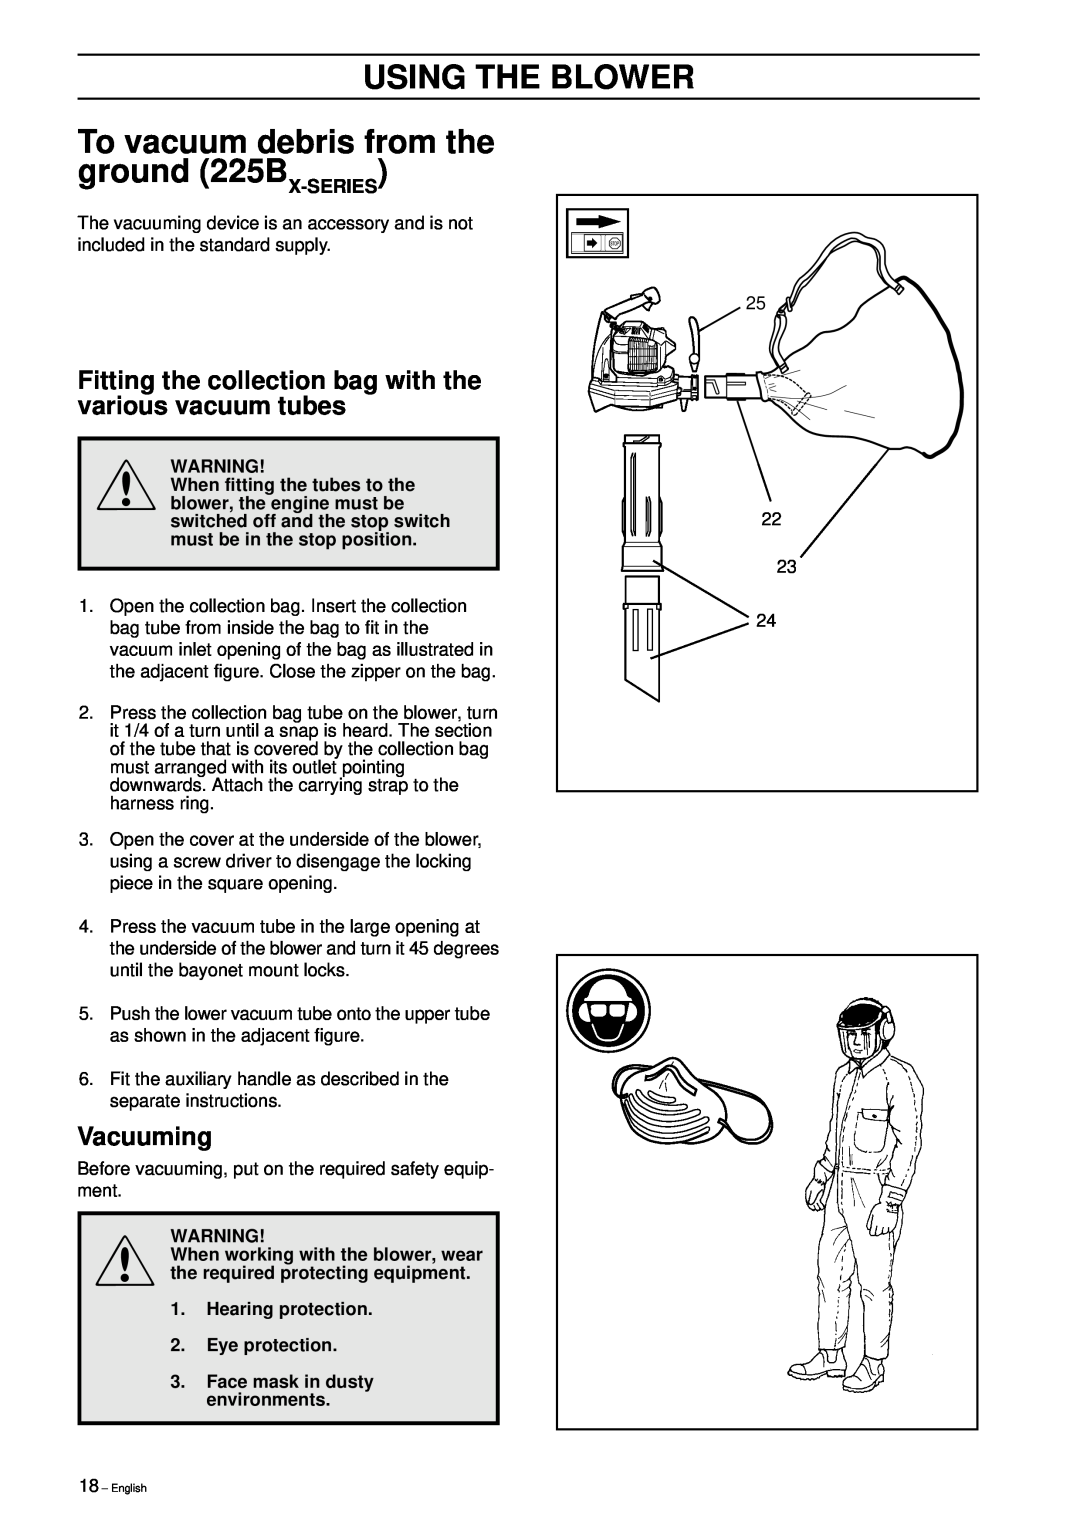 Husqvarna manual To vacuum debris from the ground 225BX-SERIES, Fitting the collection bag with the various vacuum tubes 